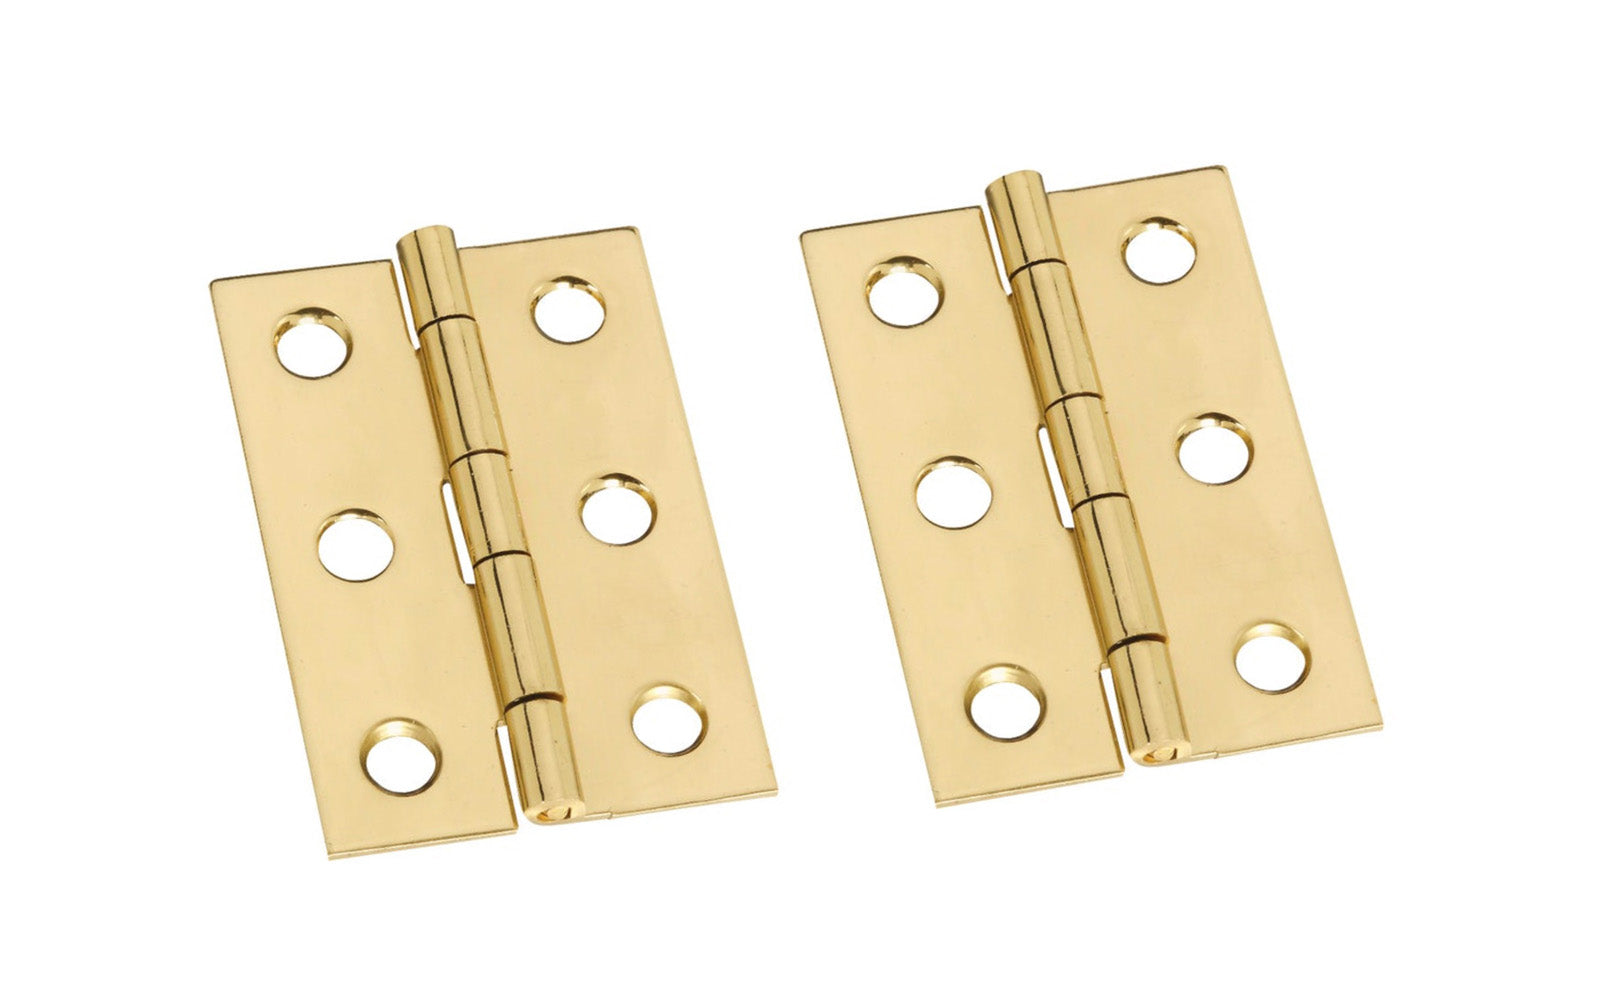 These solid brass hinges add a decorative appearance to small boxes, jewelry boxes, small lightweight cabinet doors, craft projects, etc. Made of solid brass material with a bright brass finish. 2